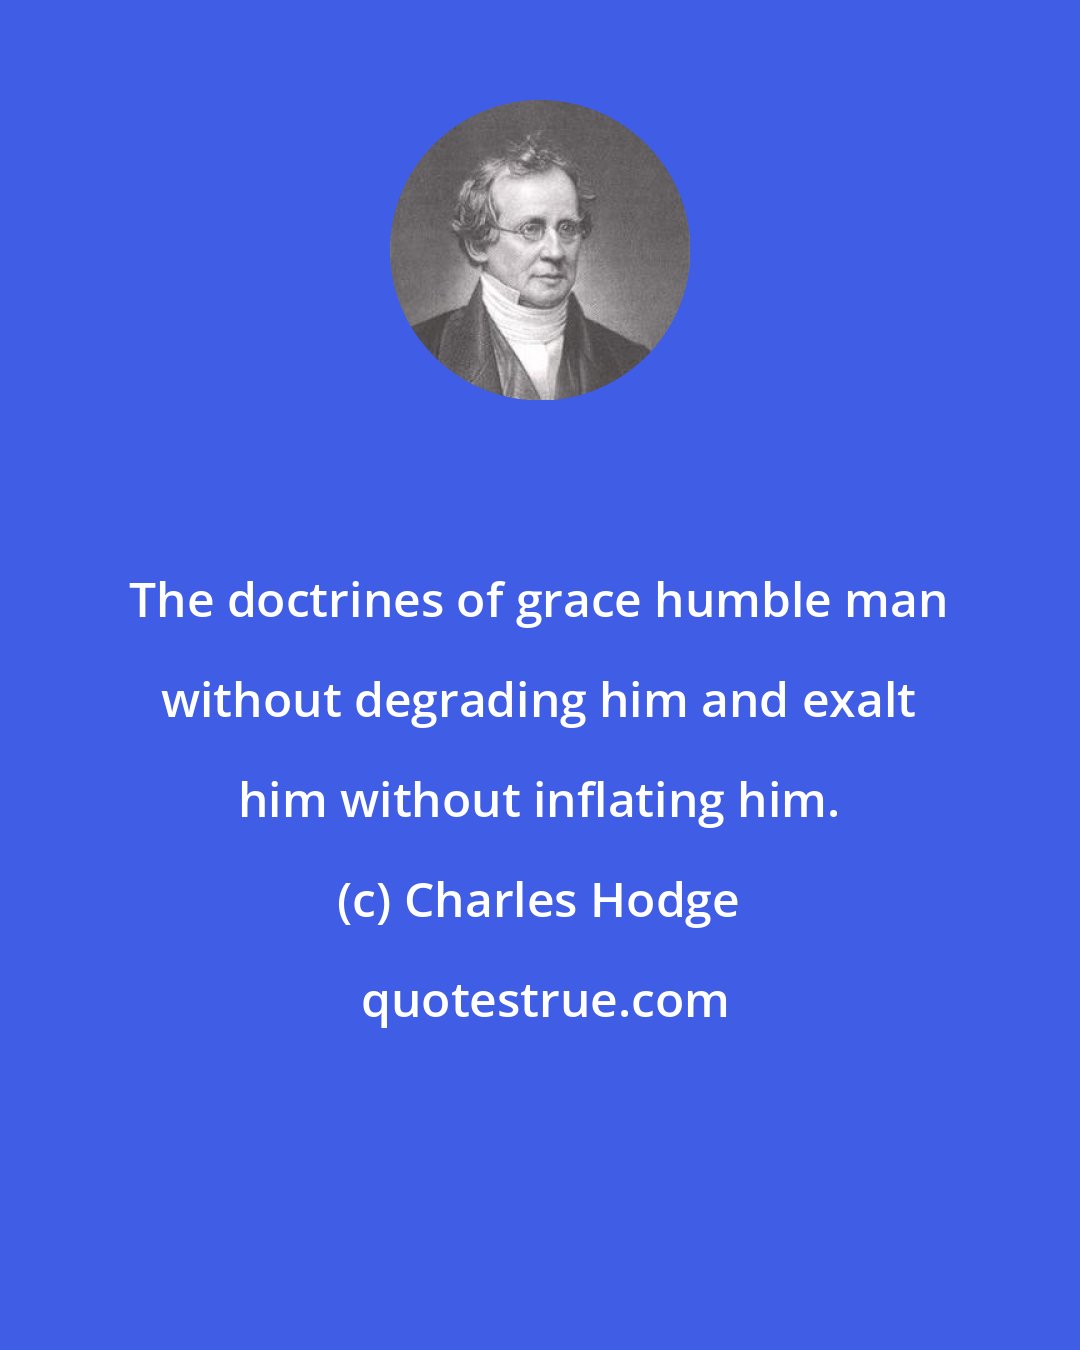 Charles Hodge: The doctrines of grace humble man without degrading him and exalt him without inflating him.